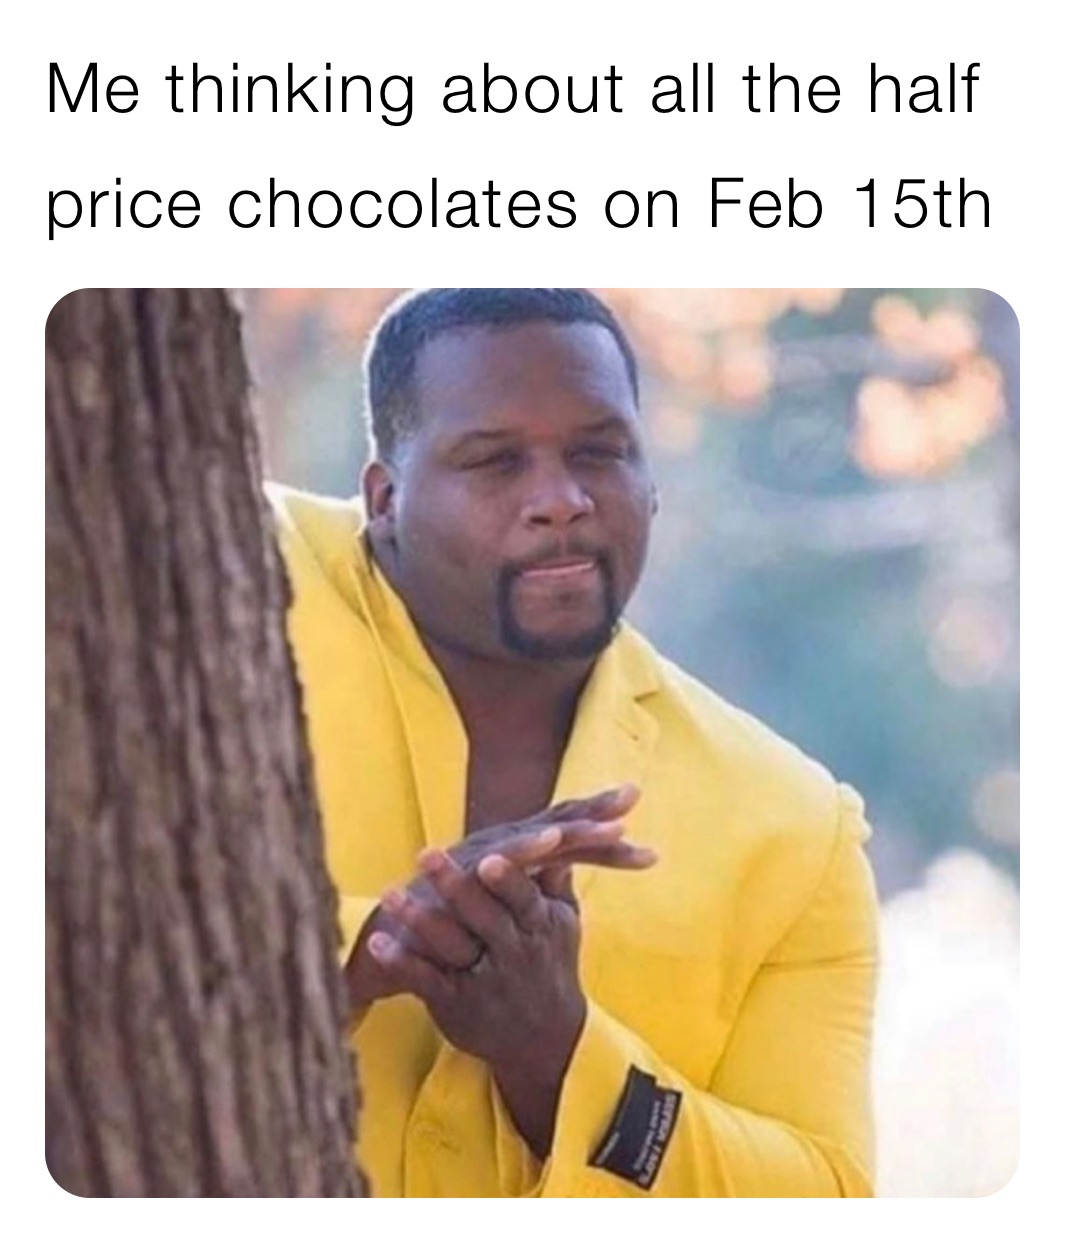 Me thinking about all the half price chocolates on Feb 15th